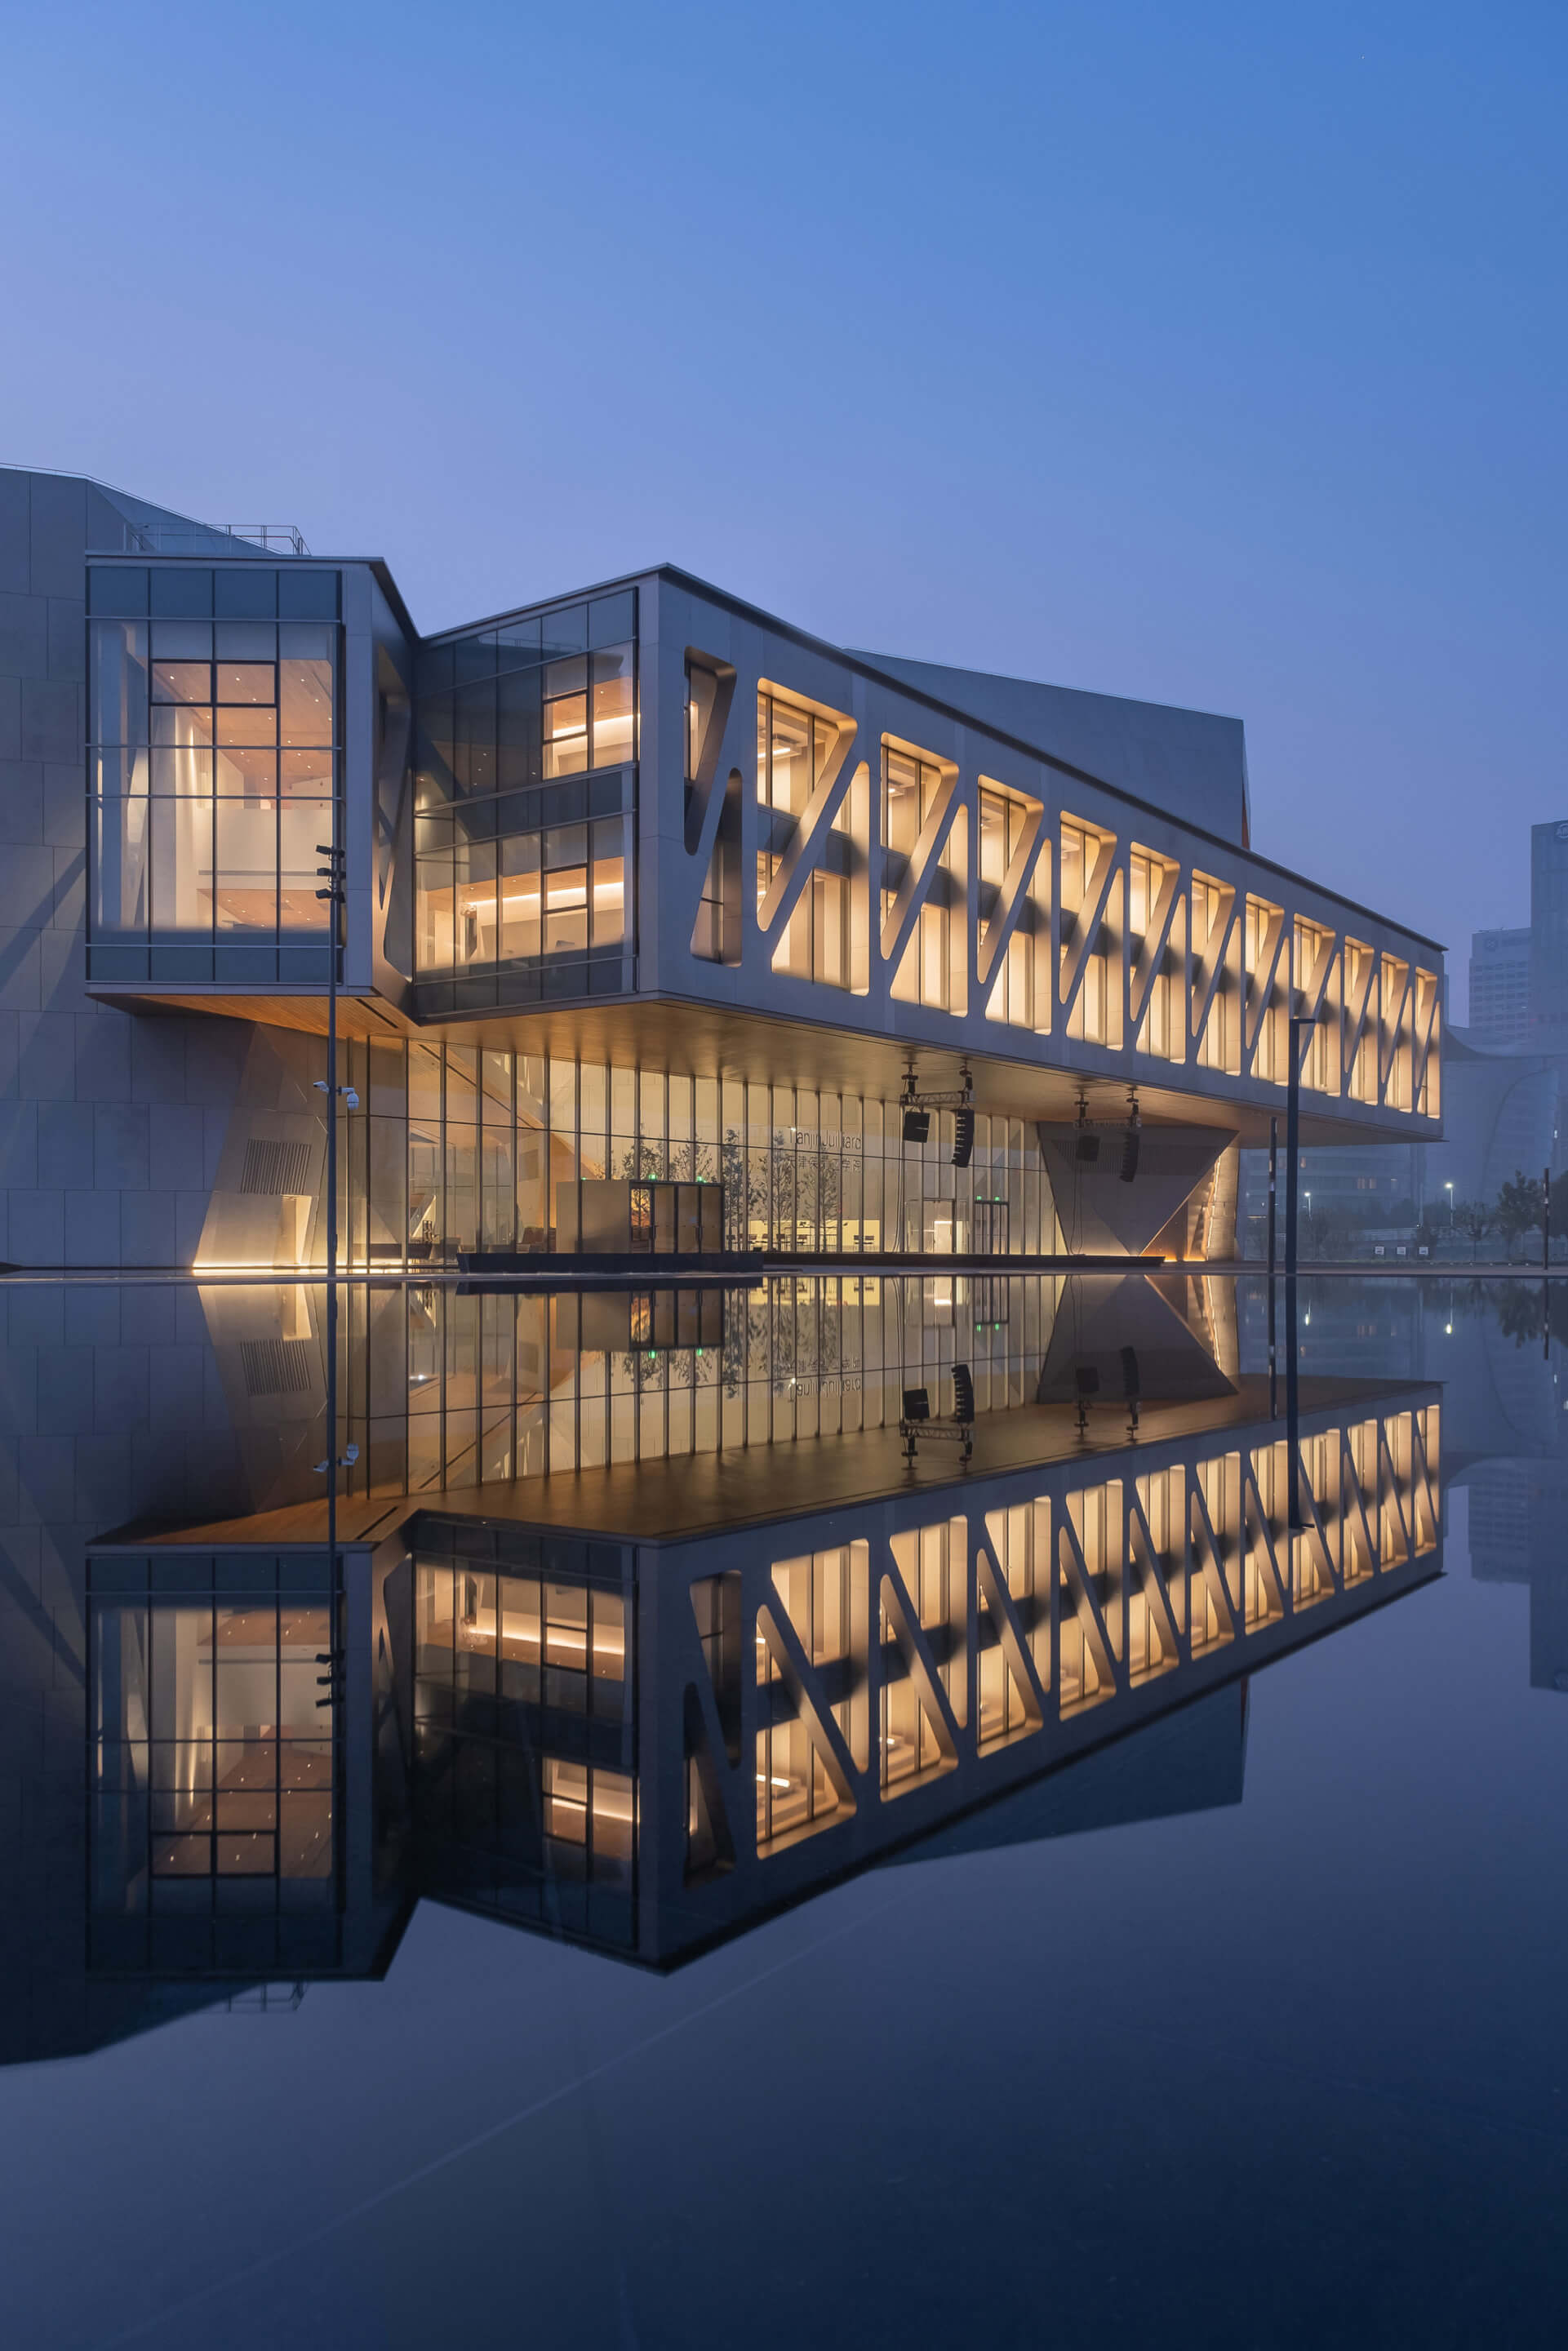 A cantilevered exoskeleton-clad structure over a reflecting pool